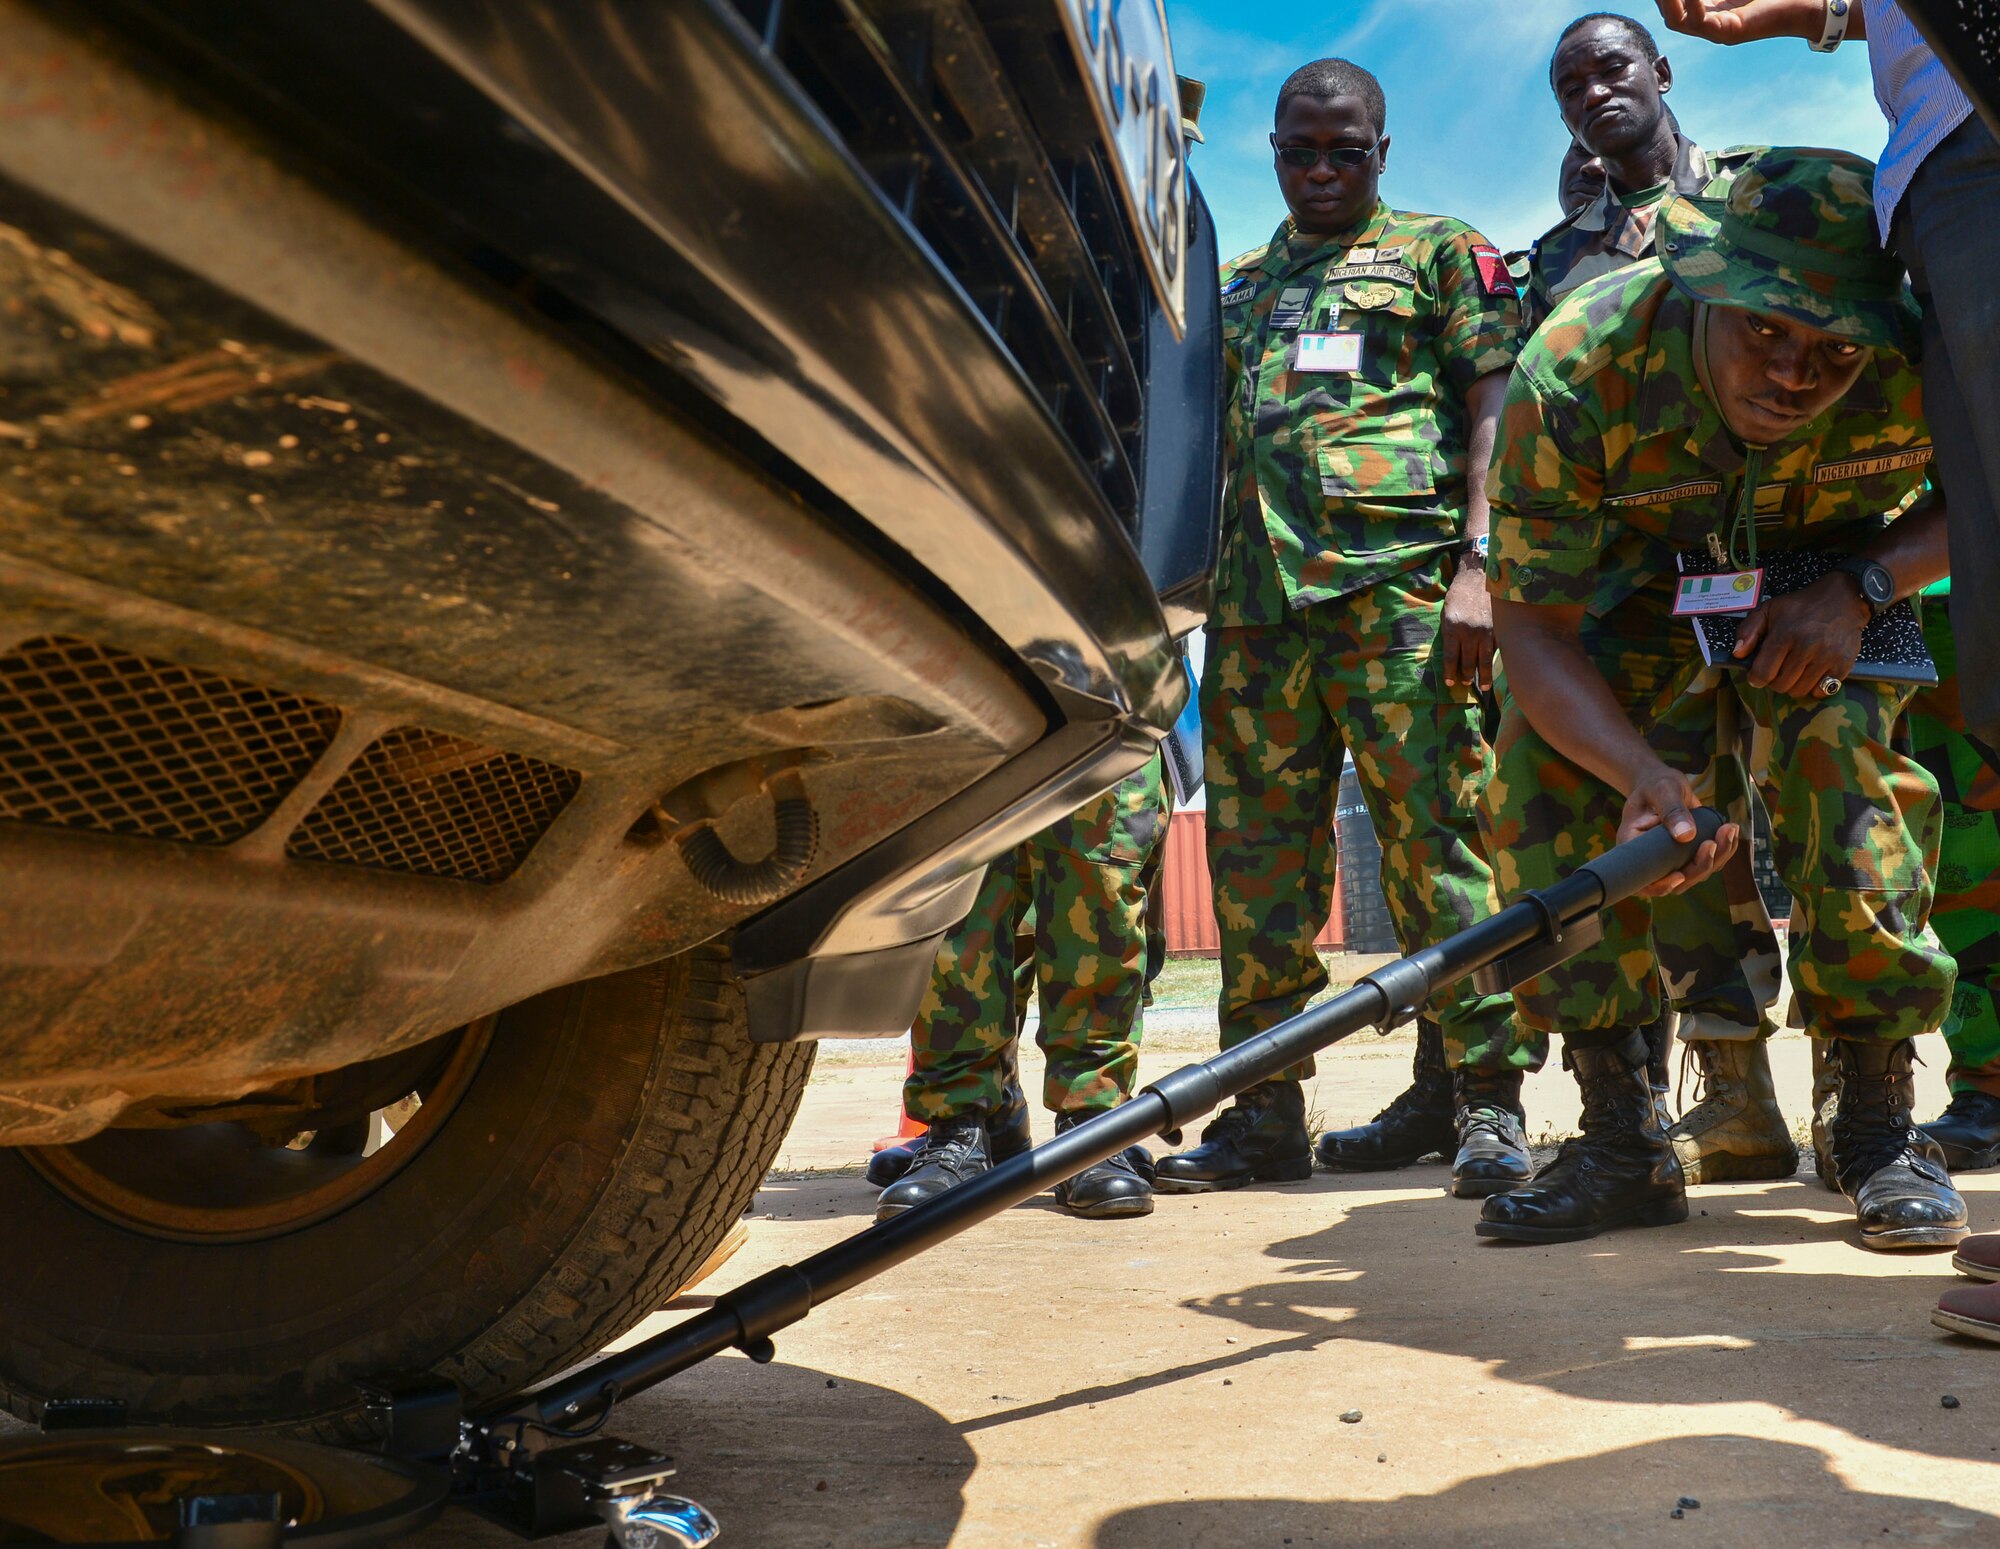 Nigerian air force squadron leader Sunkanmi Akinbohun, inspects a vehicle during the entry control familiarization portion of African Partnership Flight Ghana, Sept. 13, 2016, in Air Base Accra, Ghana. APF provides partner nations the opportunity to improve proficiency and readiness in key mission areas such as expeditionary airbase defense. (U.S. Air Force Staff Sgt. Stephanie Longoria)